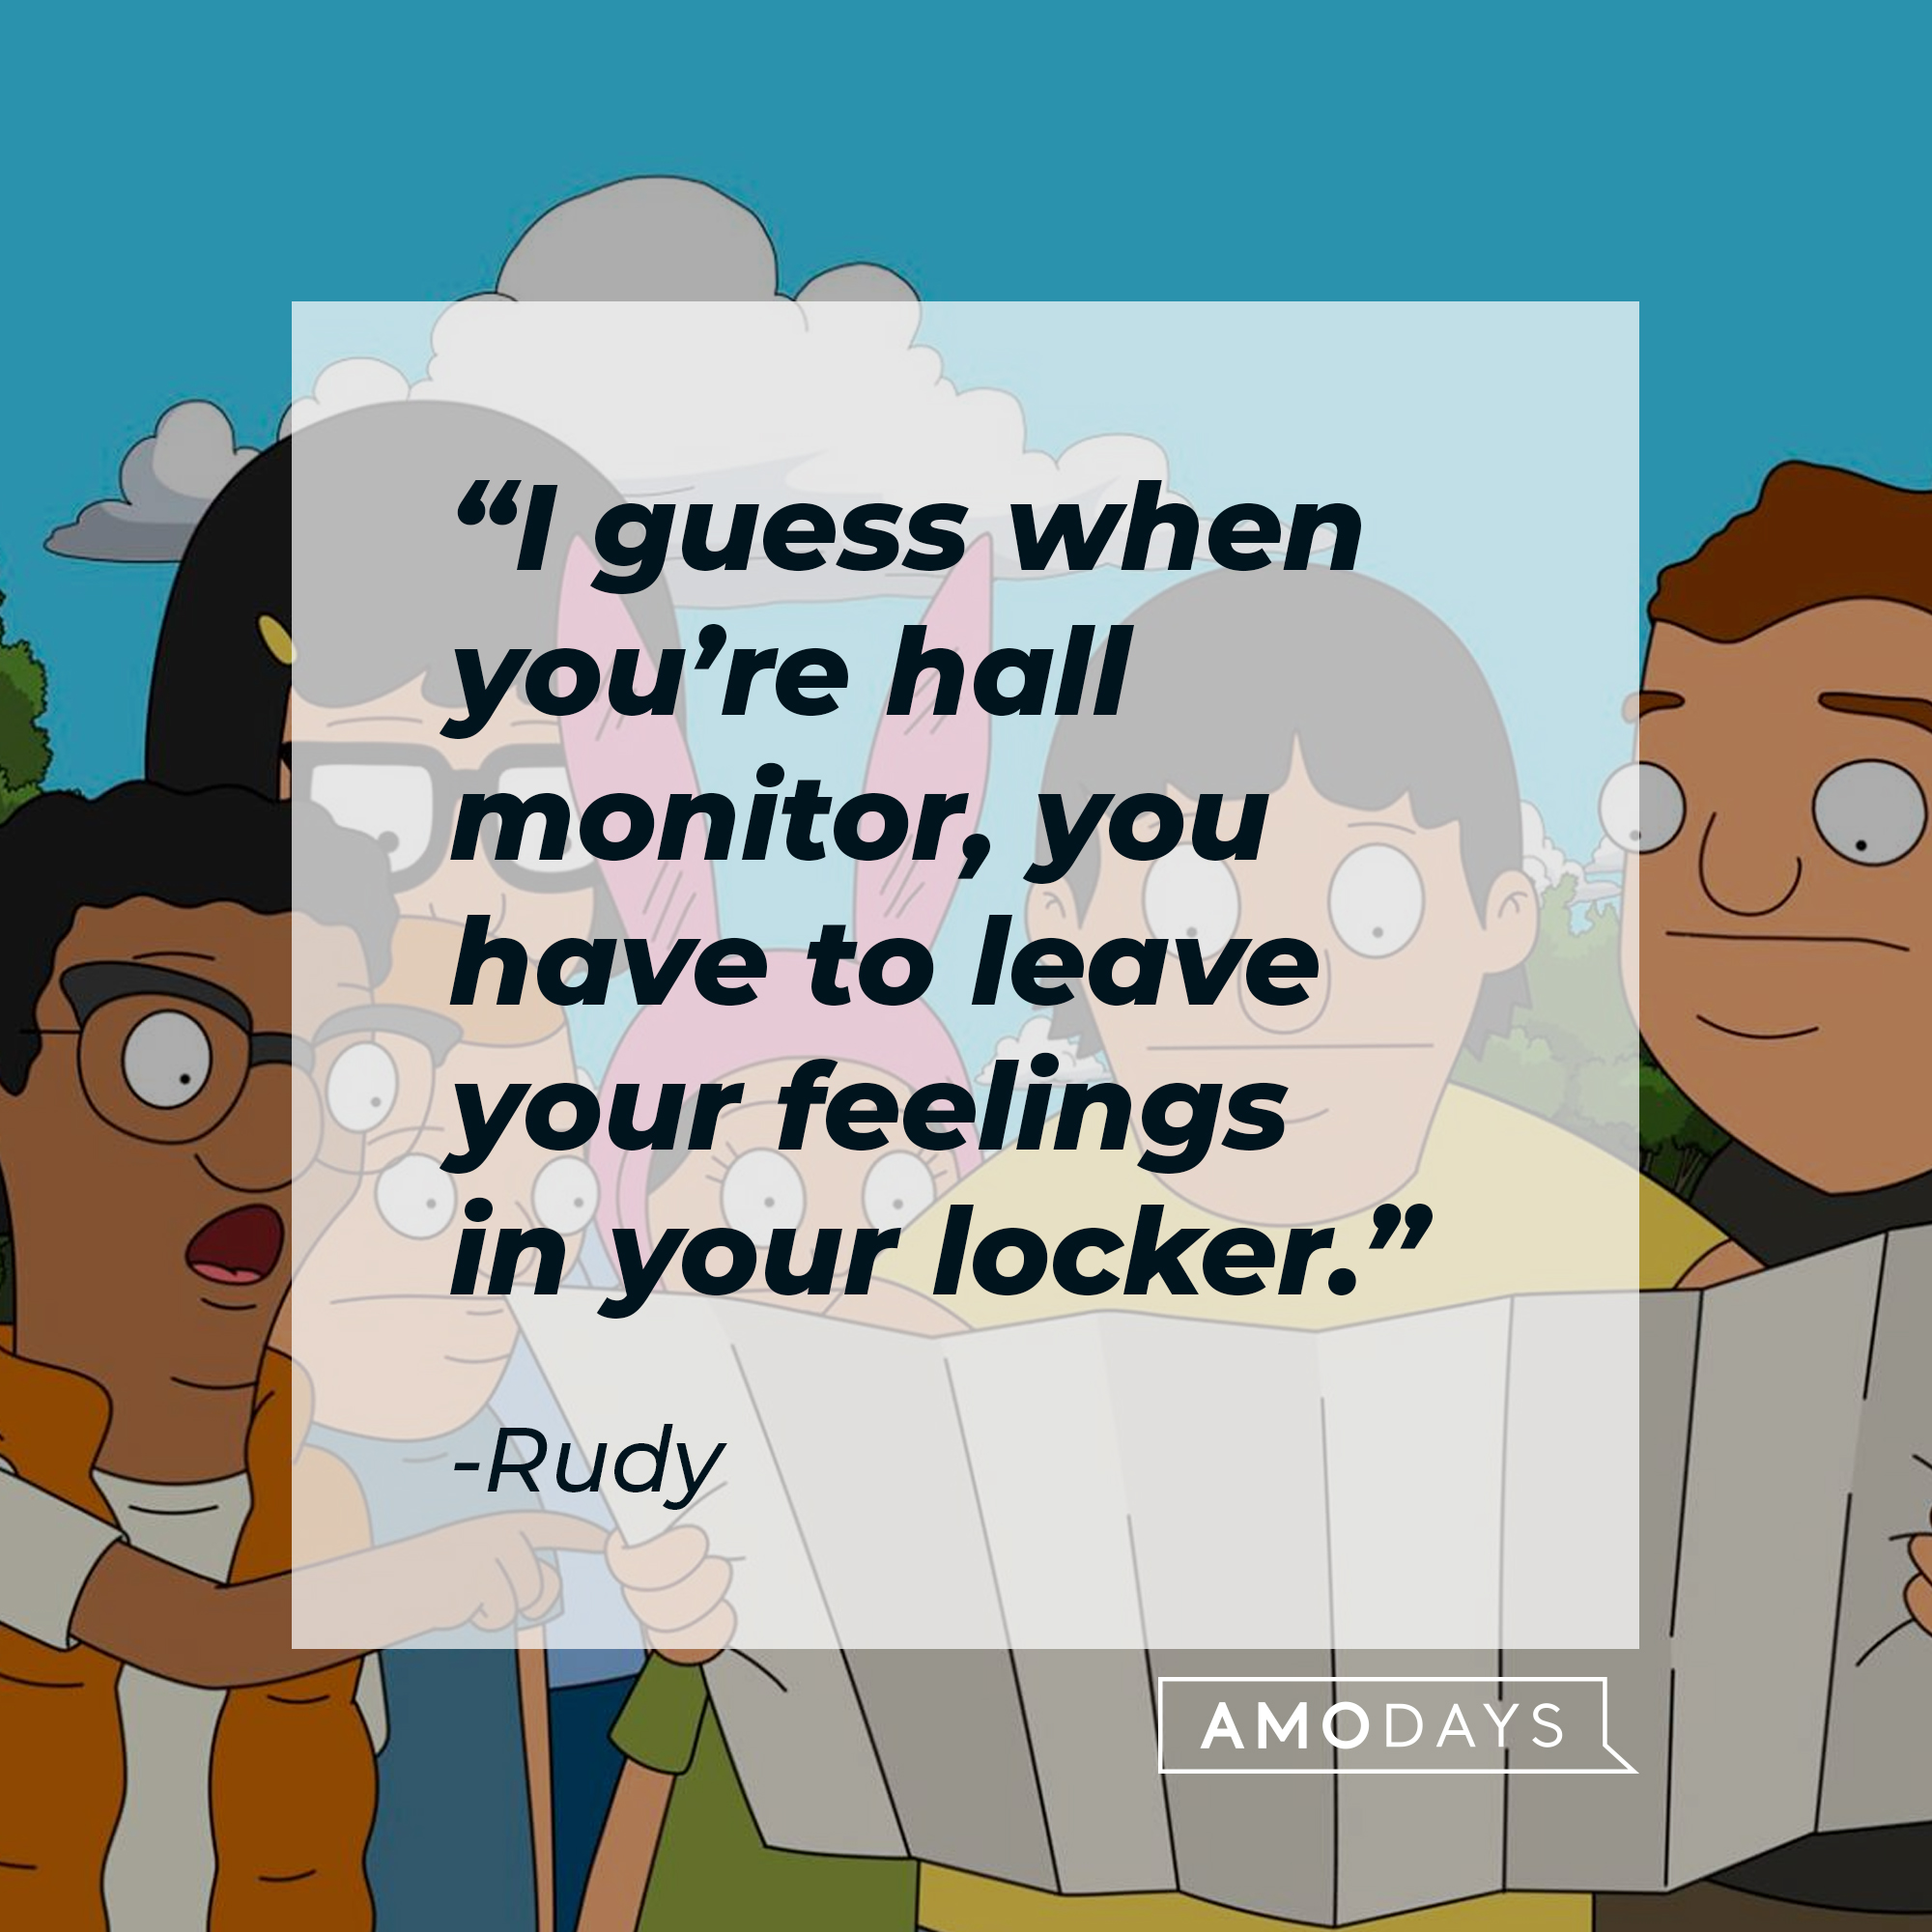 Characters from “Bob’s Burger’s,” with Rudy’s quote: "I guess when you’re hall monitor, you have to leave your feelings in your locker." | Source: Facebook.com/BobsBurgerser,